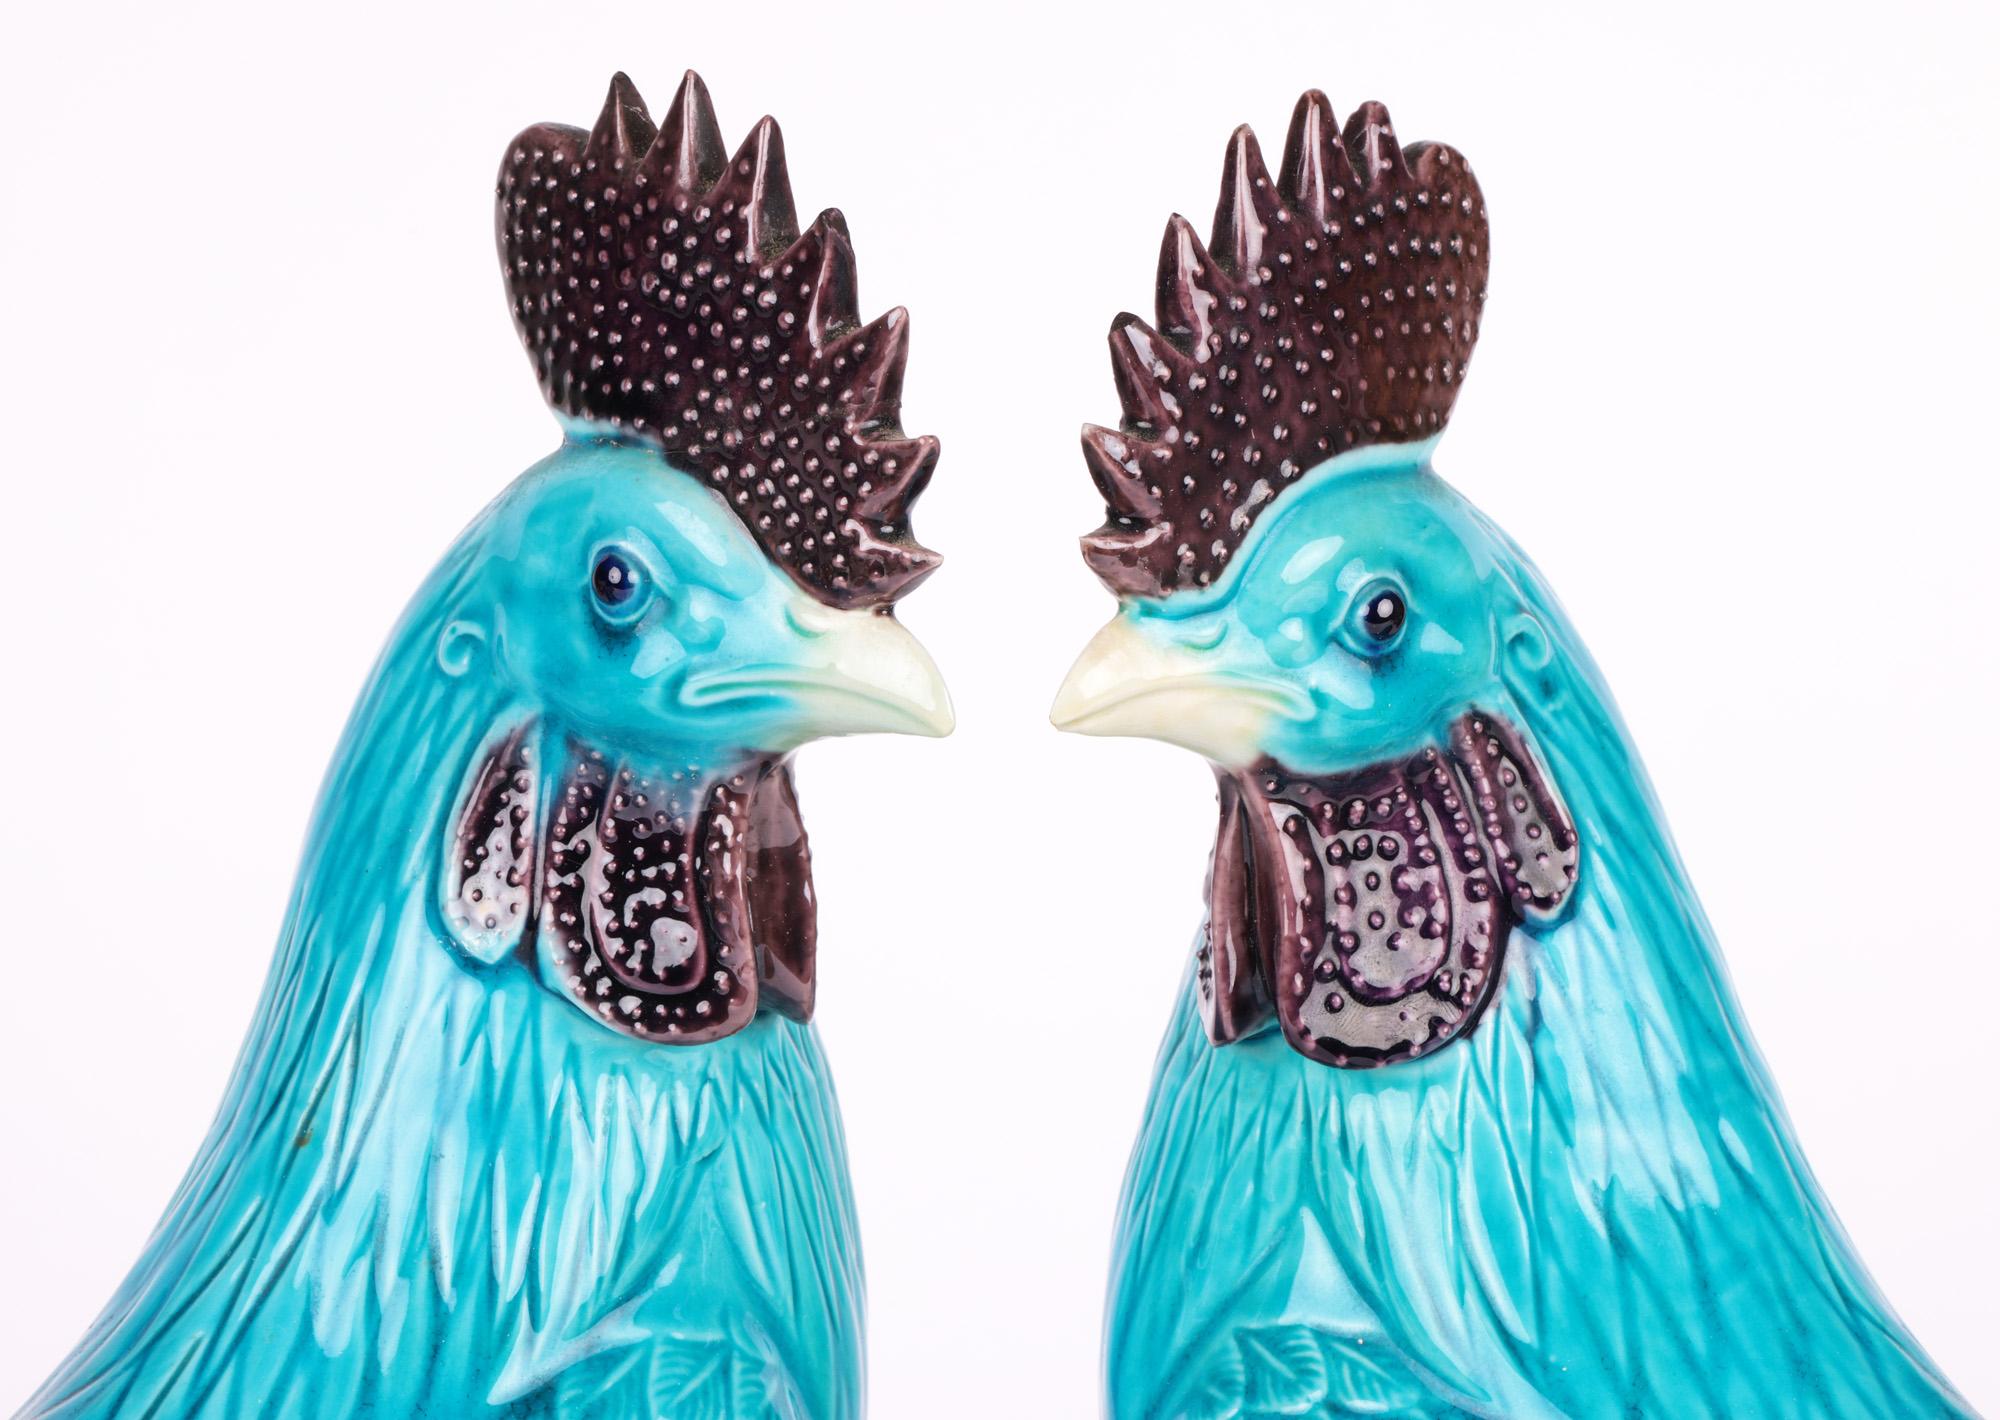 A very fine and attractive pair of Chinese turquoise glazed cockerel figures dating from the first half of the 20th century. The hollow biscuit porcelain figures stand perched on a rock work mound with their heads turned sideways. They are both well